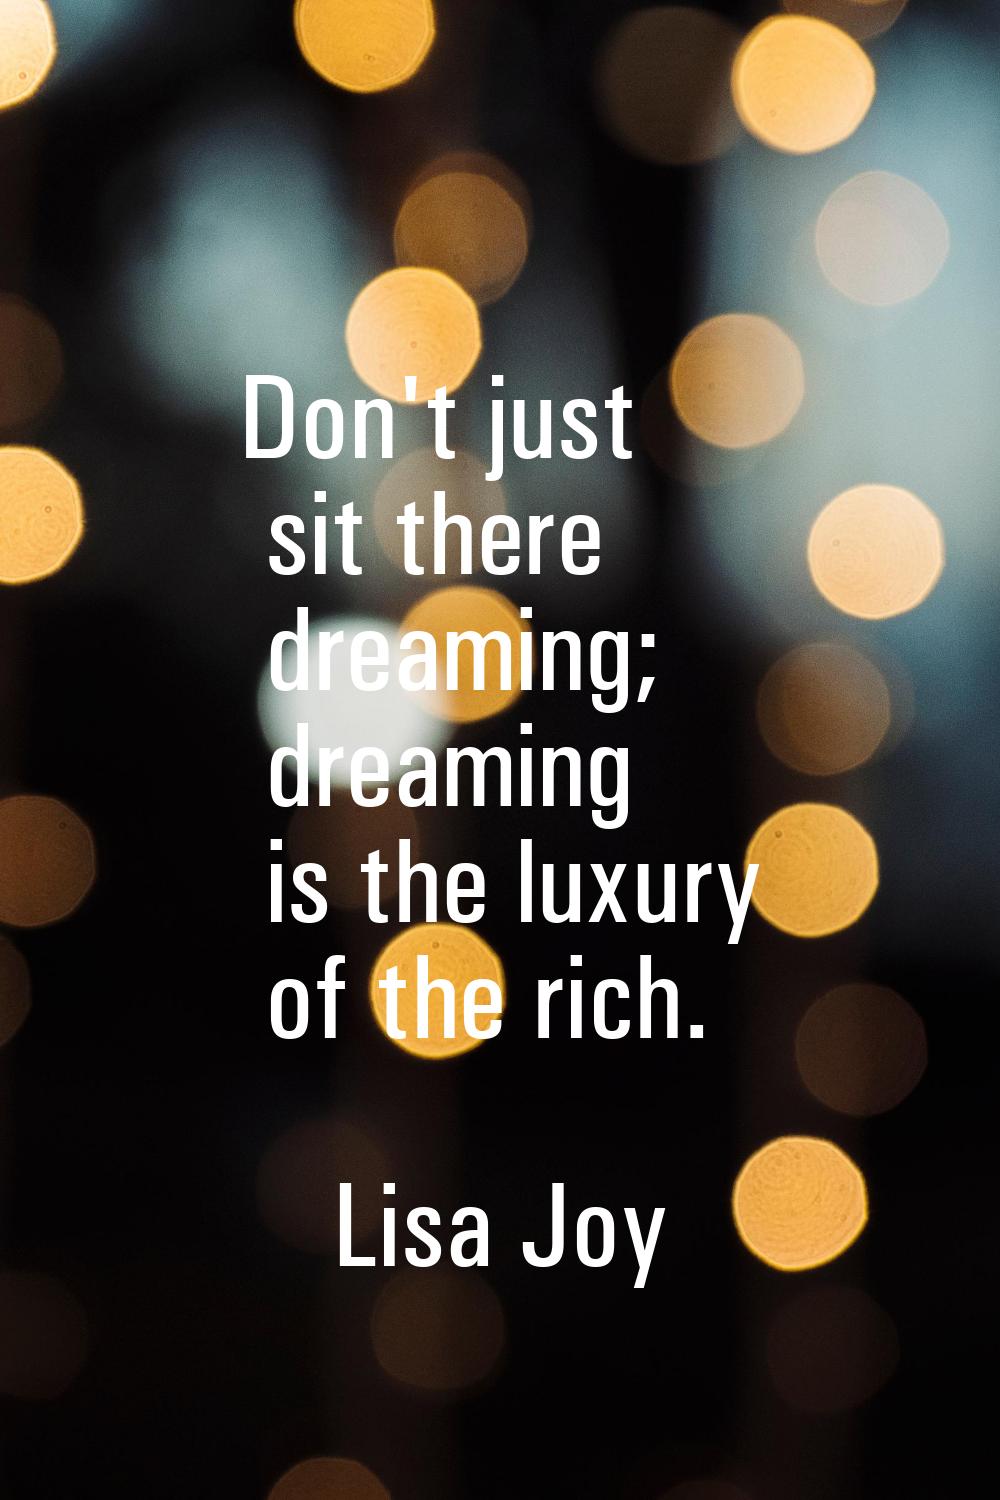 Don't just sit there dreaming; dreaming is the luxury of the rich.